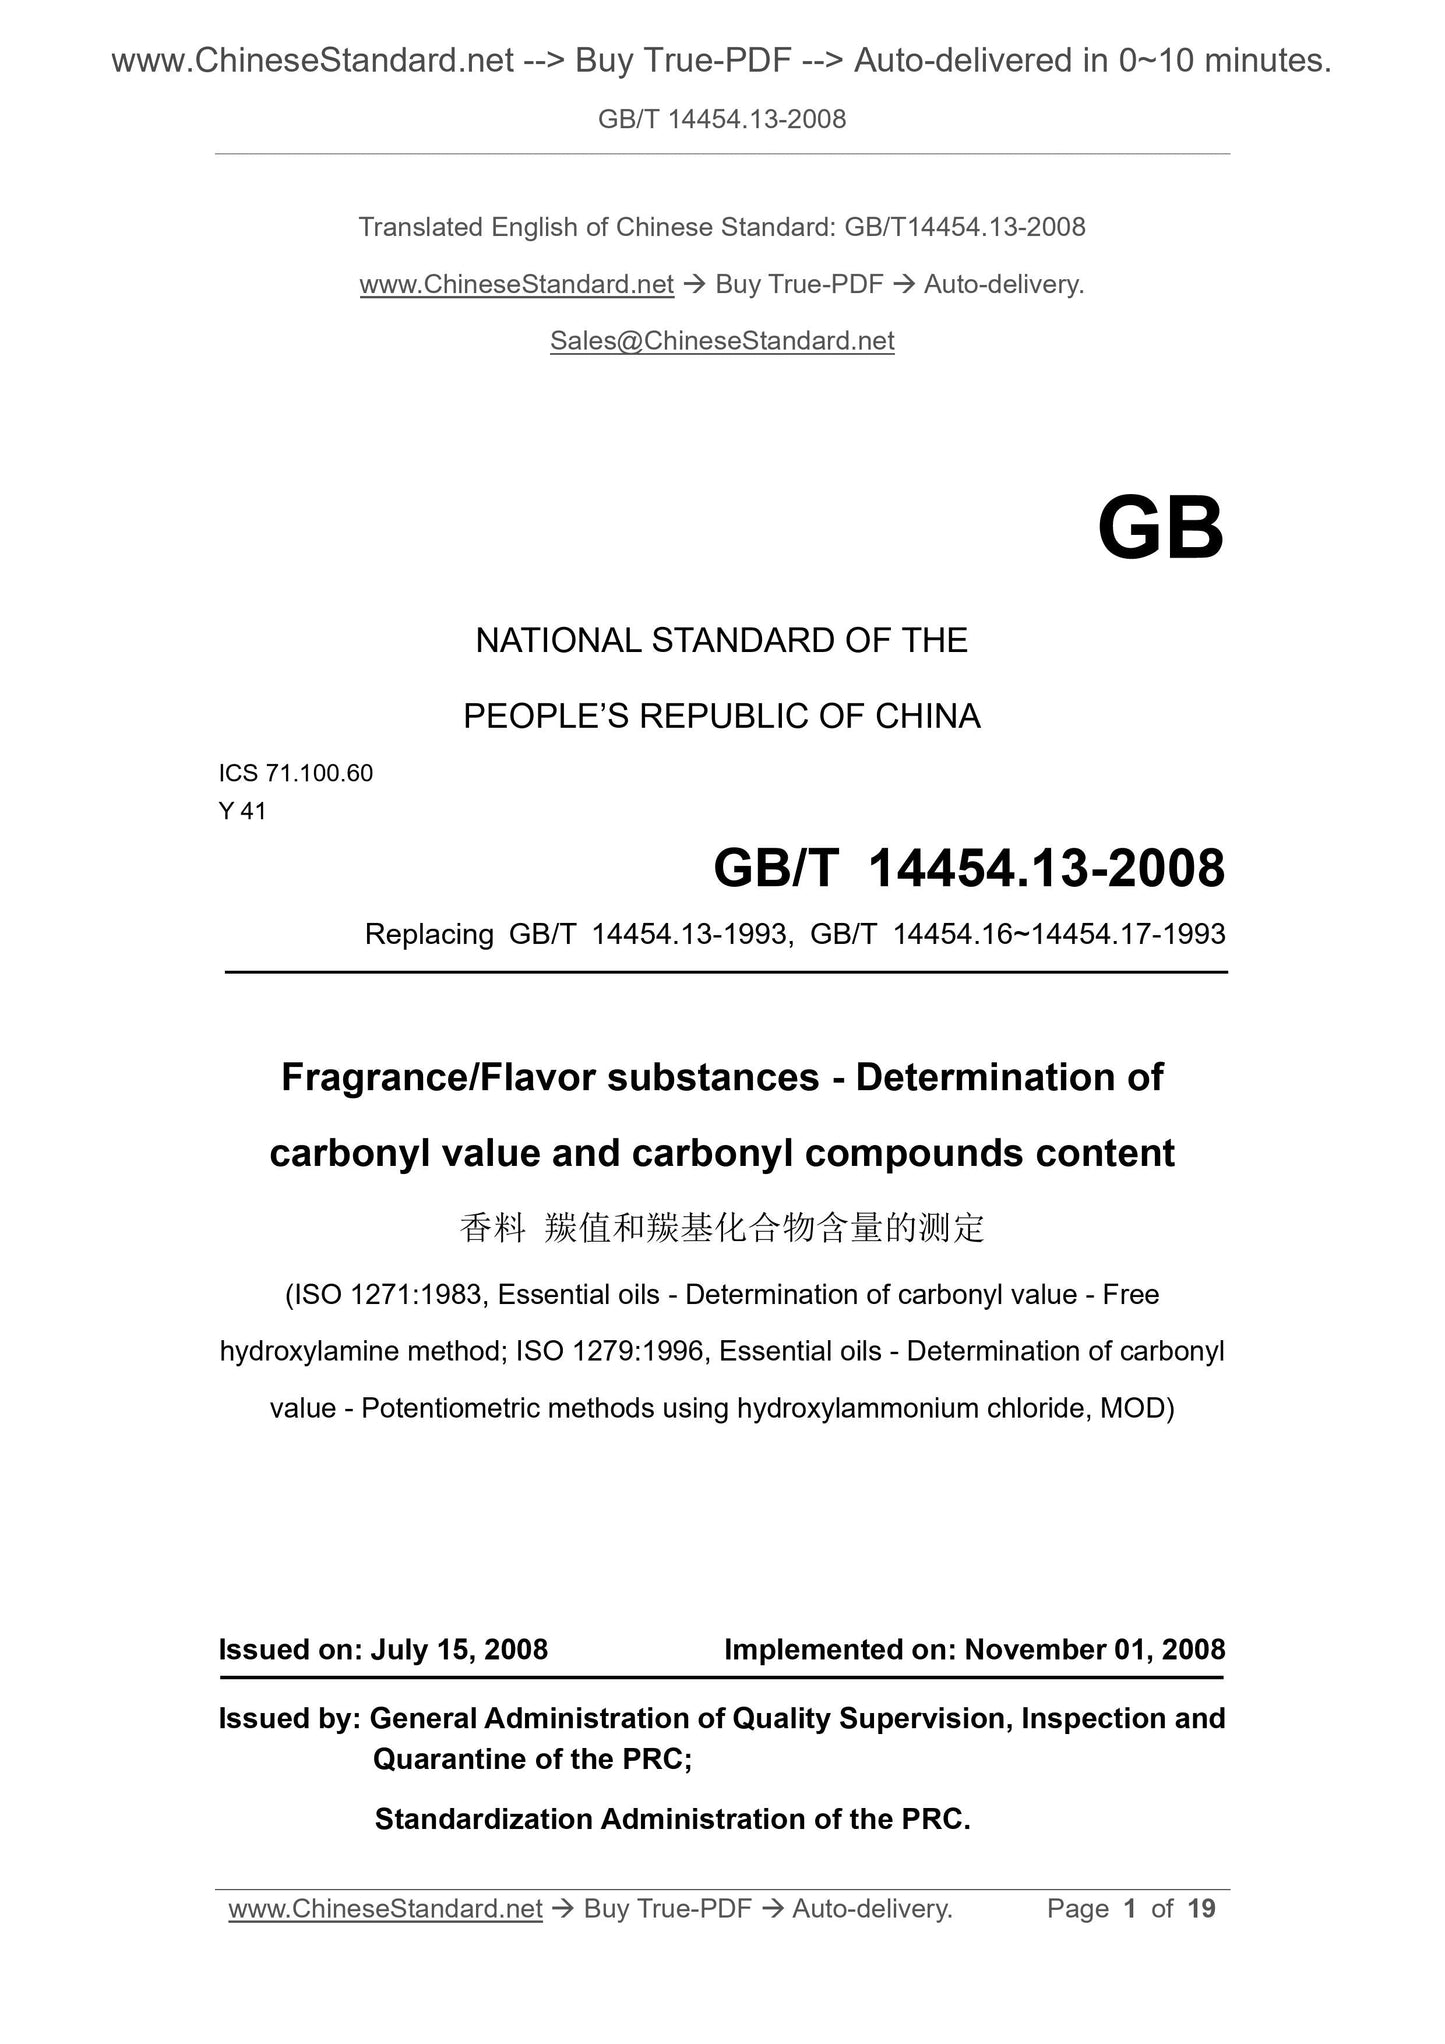 GB/T 14454.13-2008 Page 1